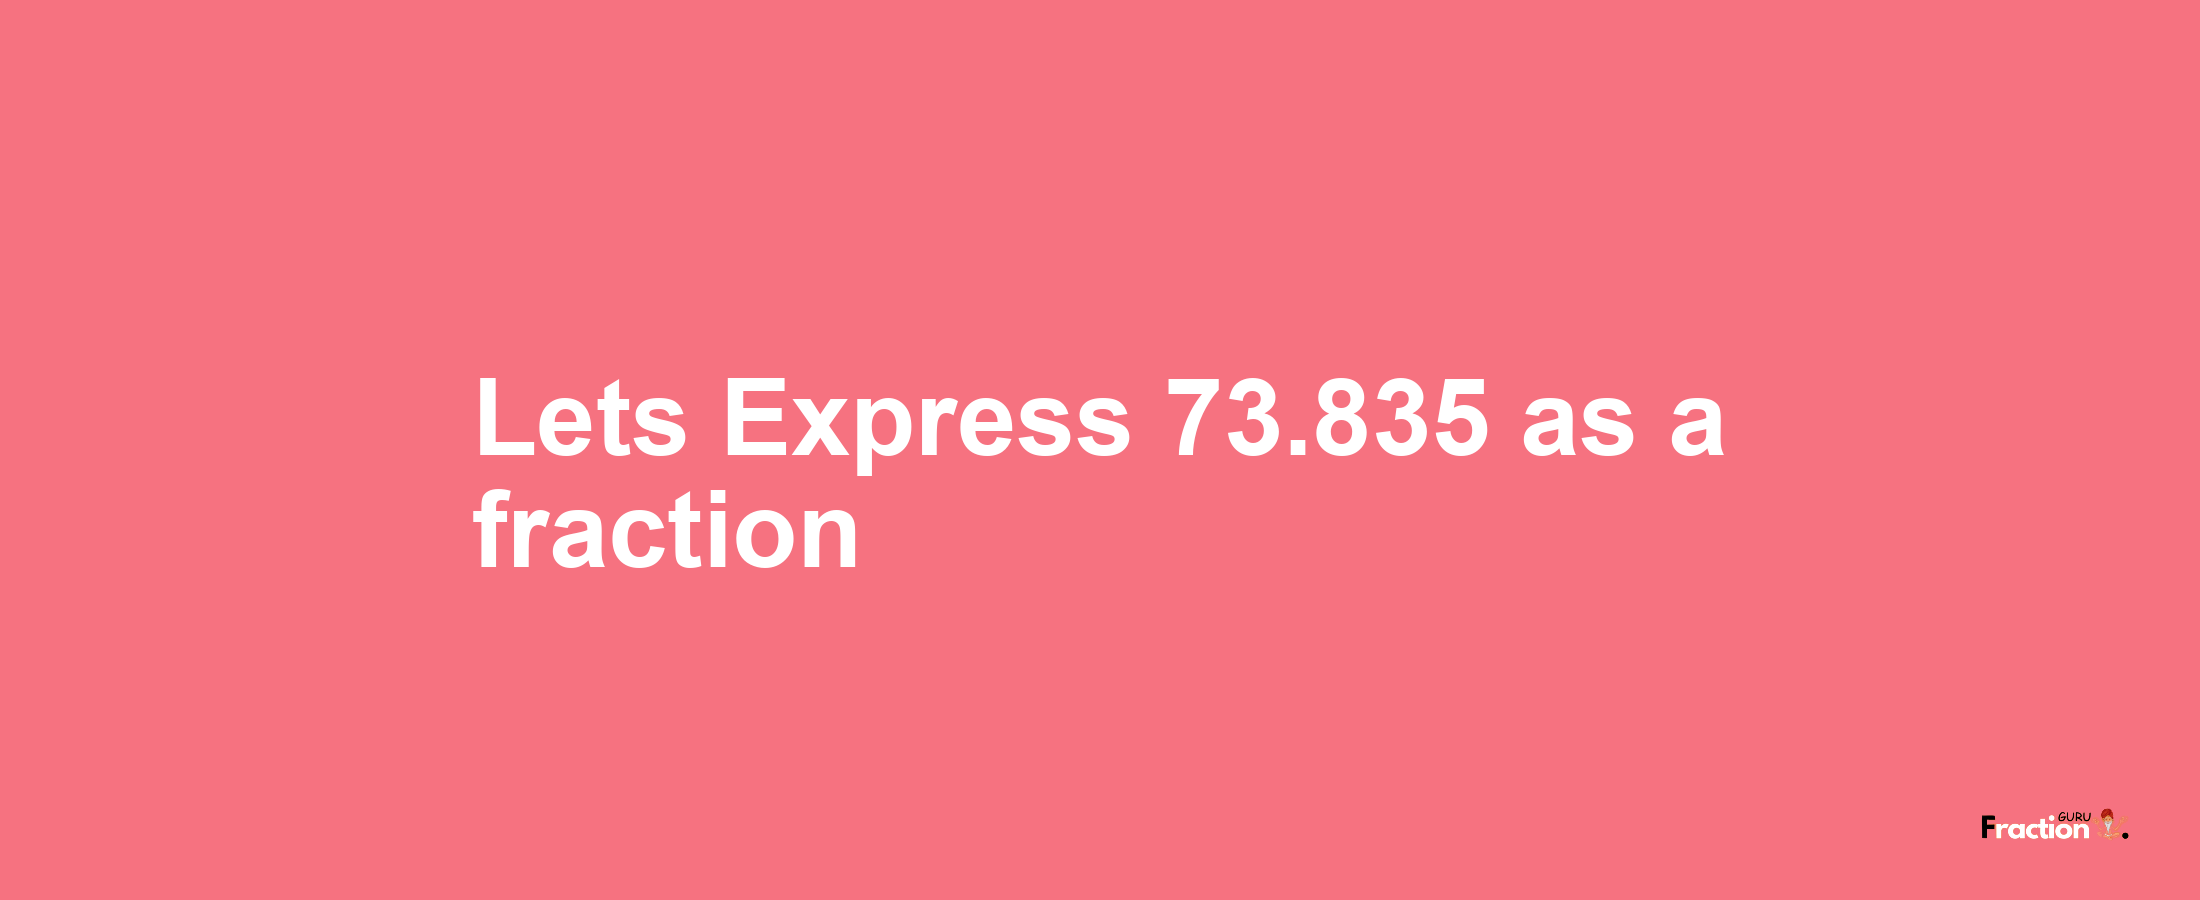 Lets Express 73.835 as afraction